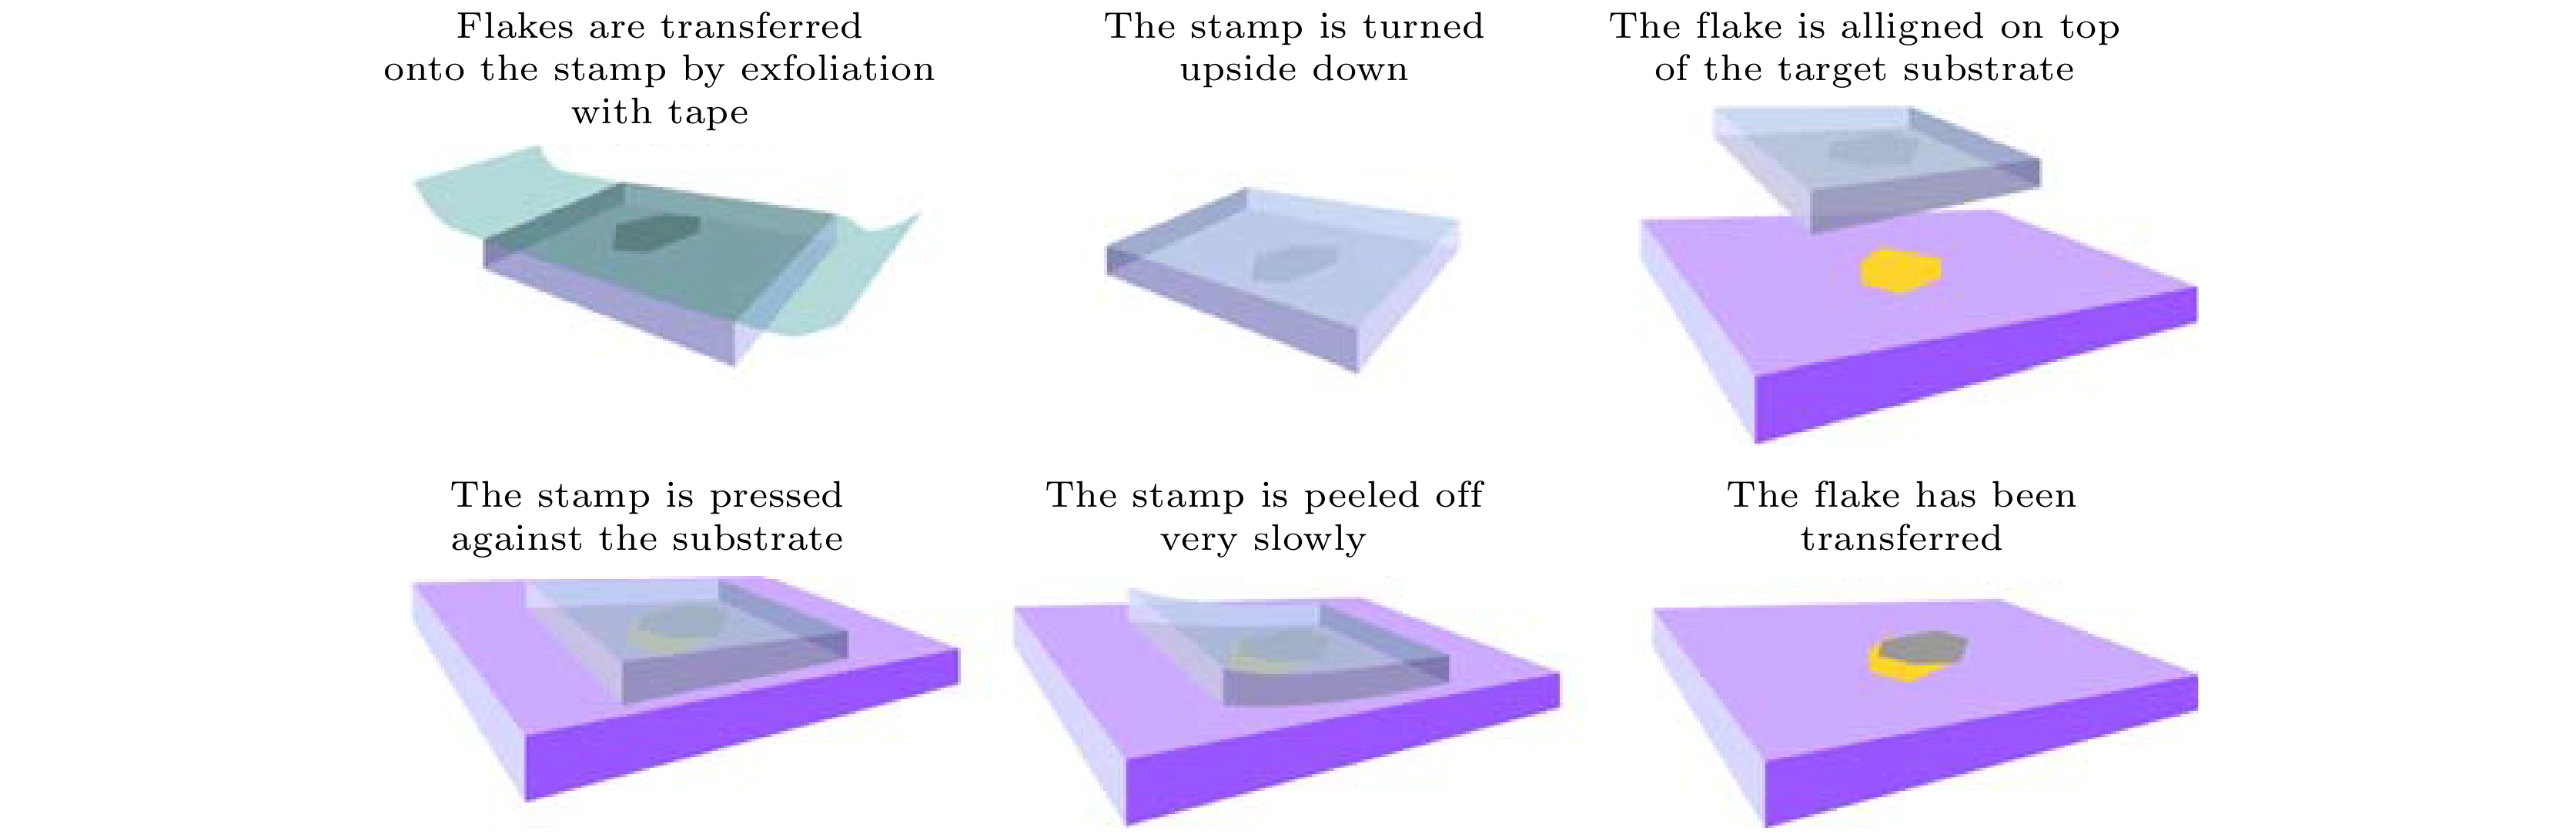 The Fabrication And Physical Properties Of Two Dimensional Van Der Waals Heterostructures